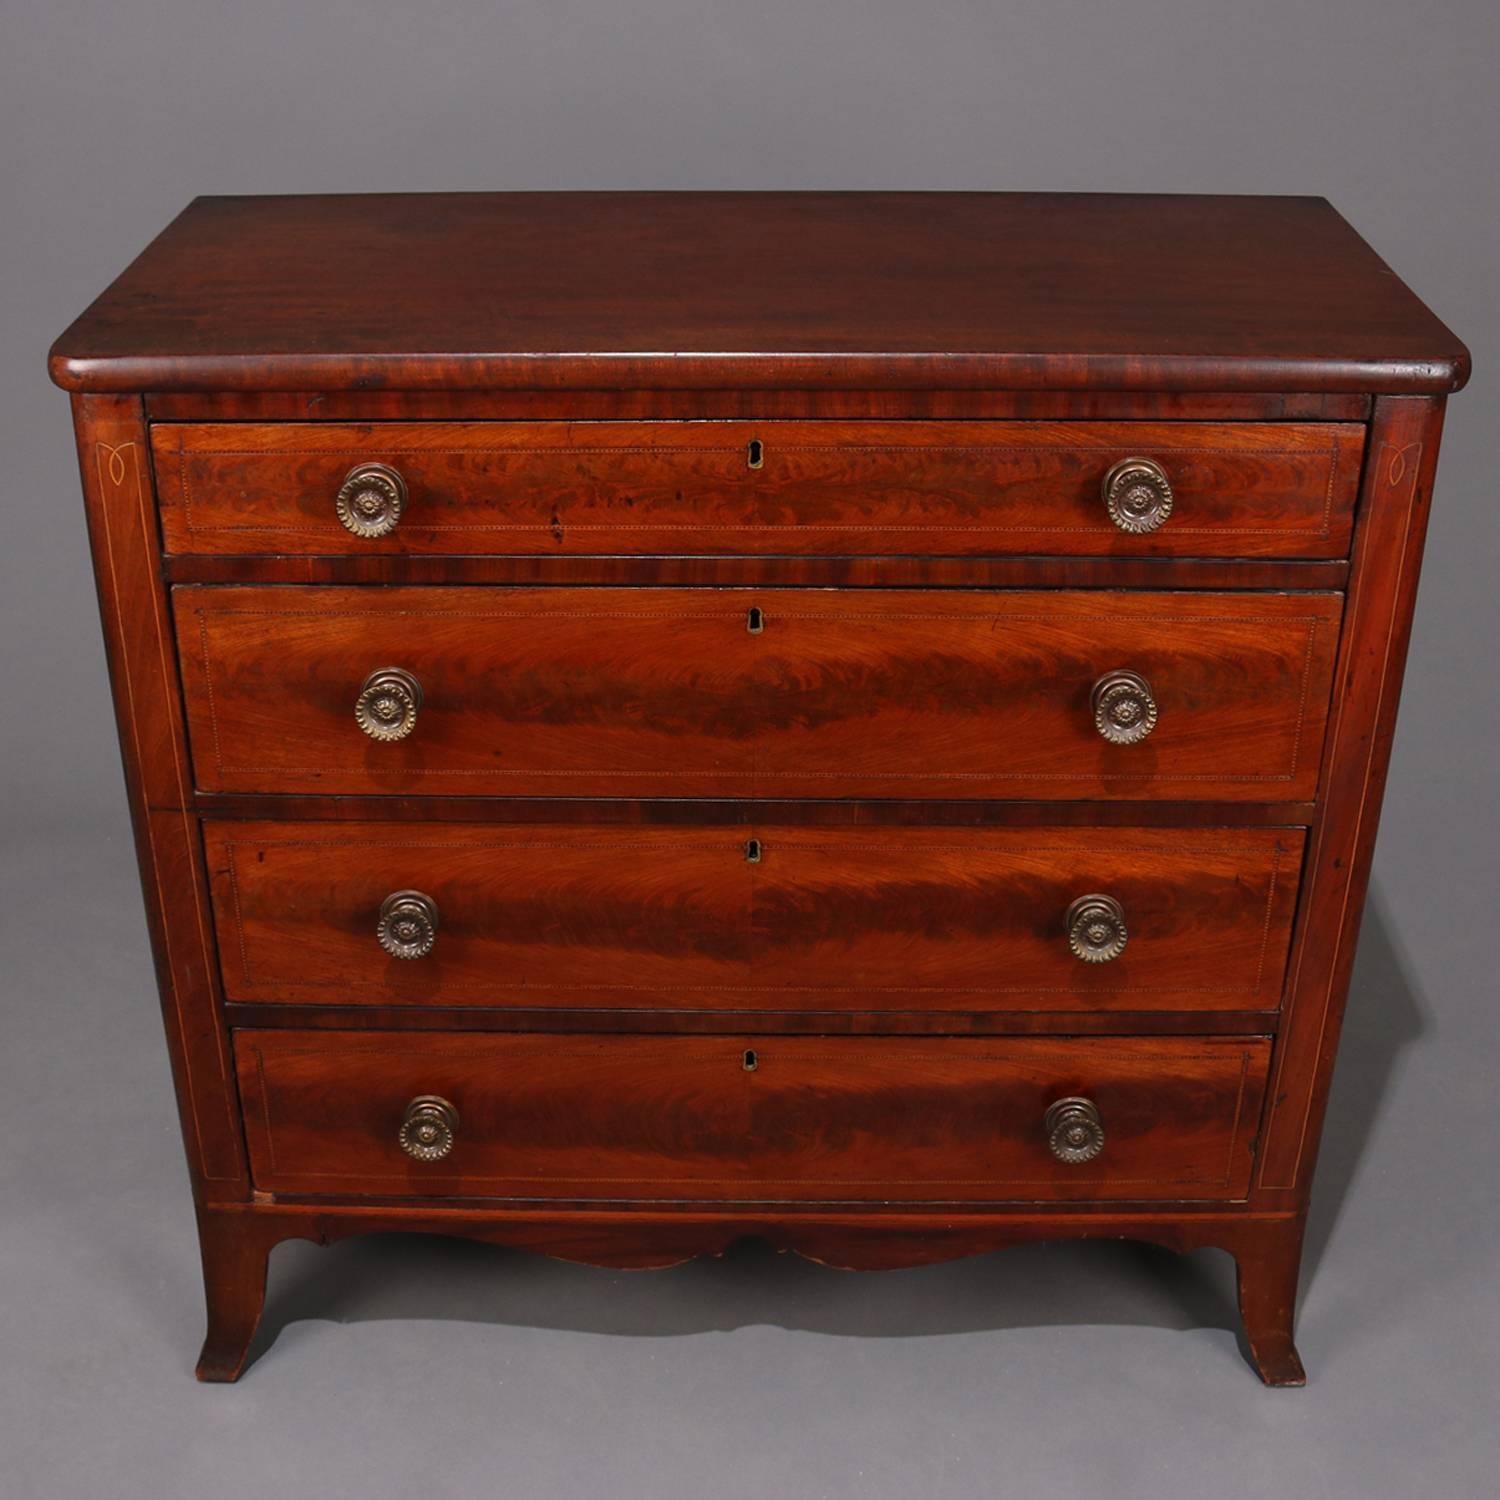 Cast Antique English Hepplewhite Inlay Banded Flame Mahogany Chest of Drawers